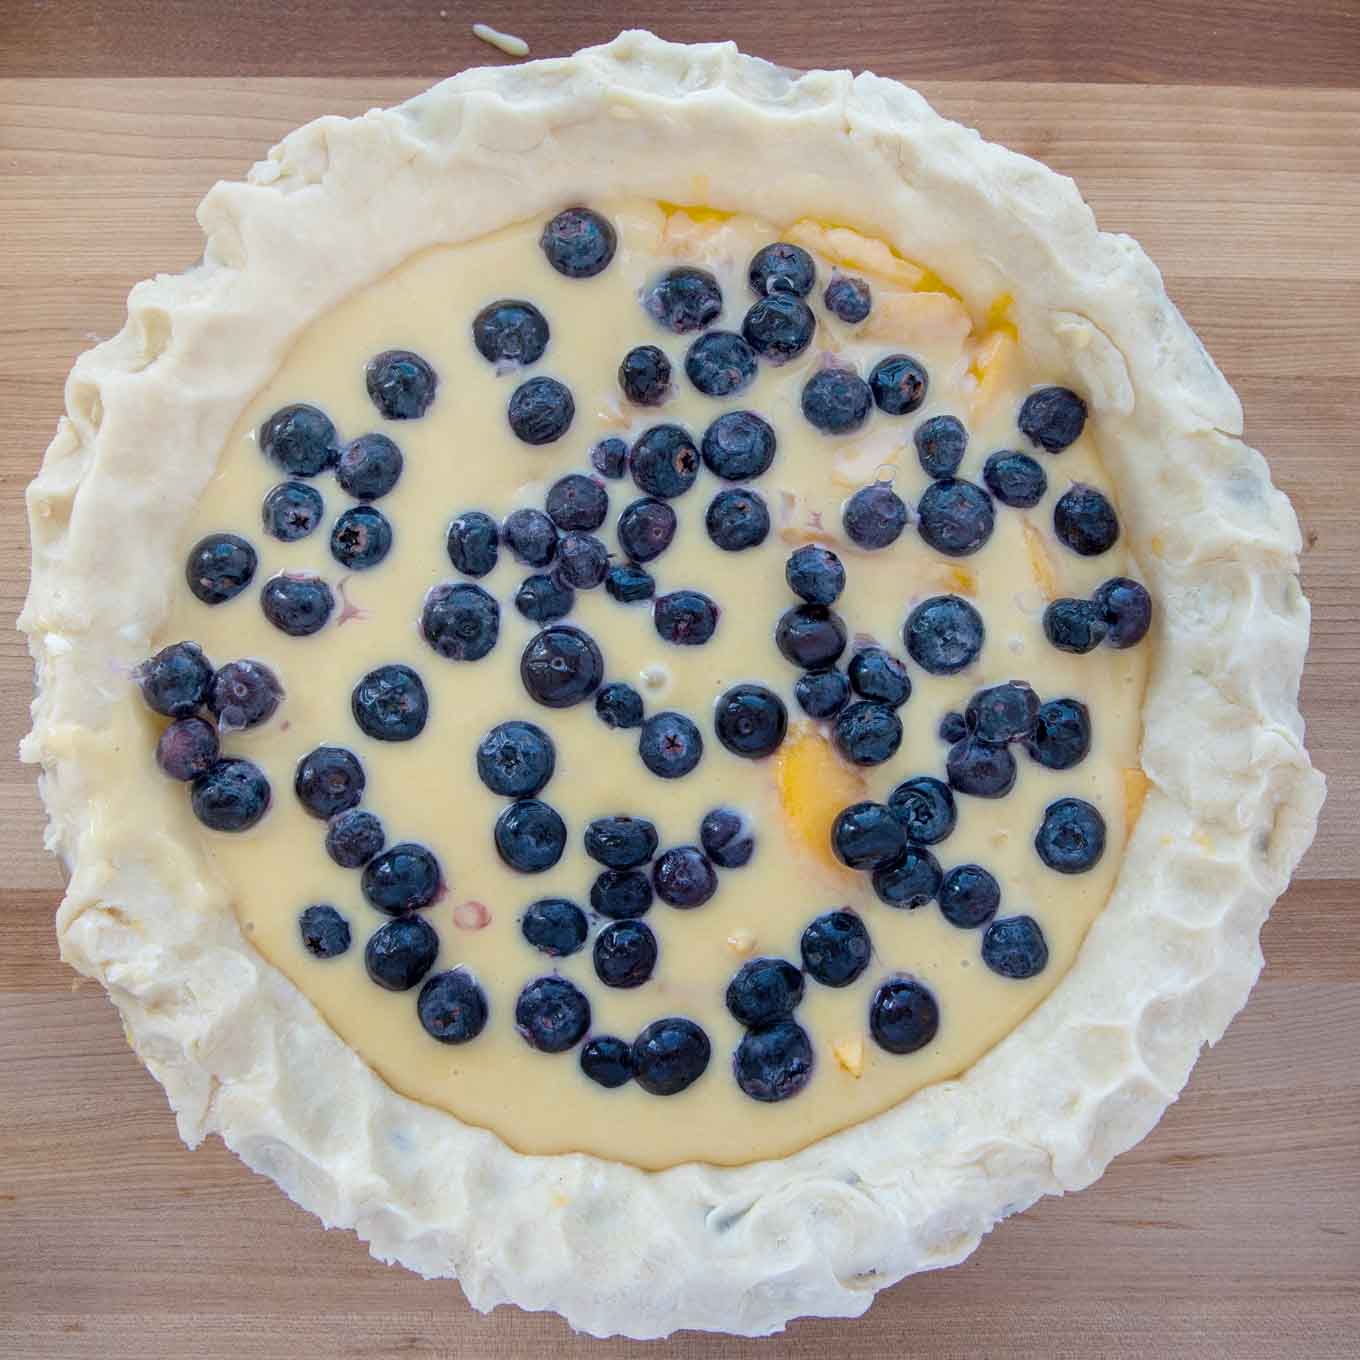 blueberries added to custard filling in the pie crust